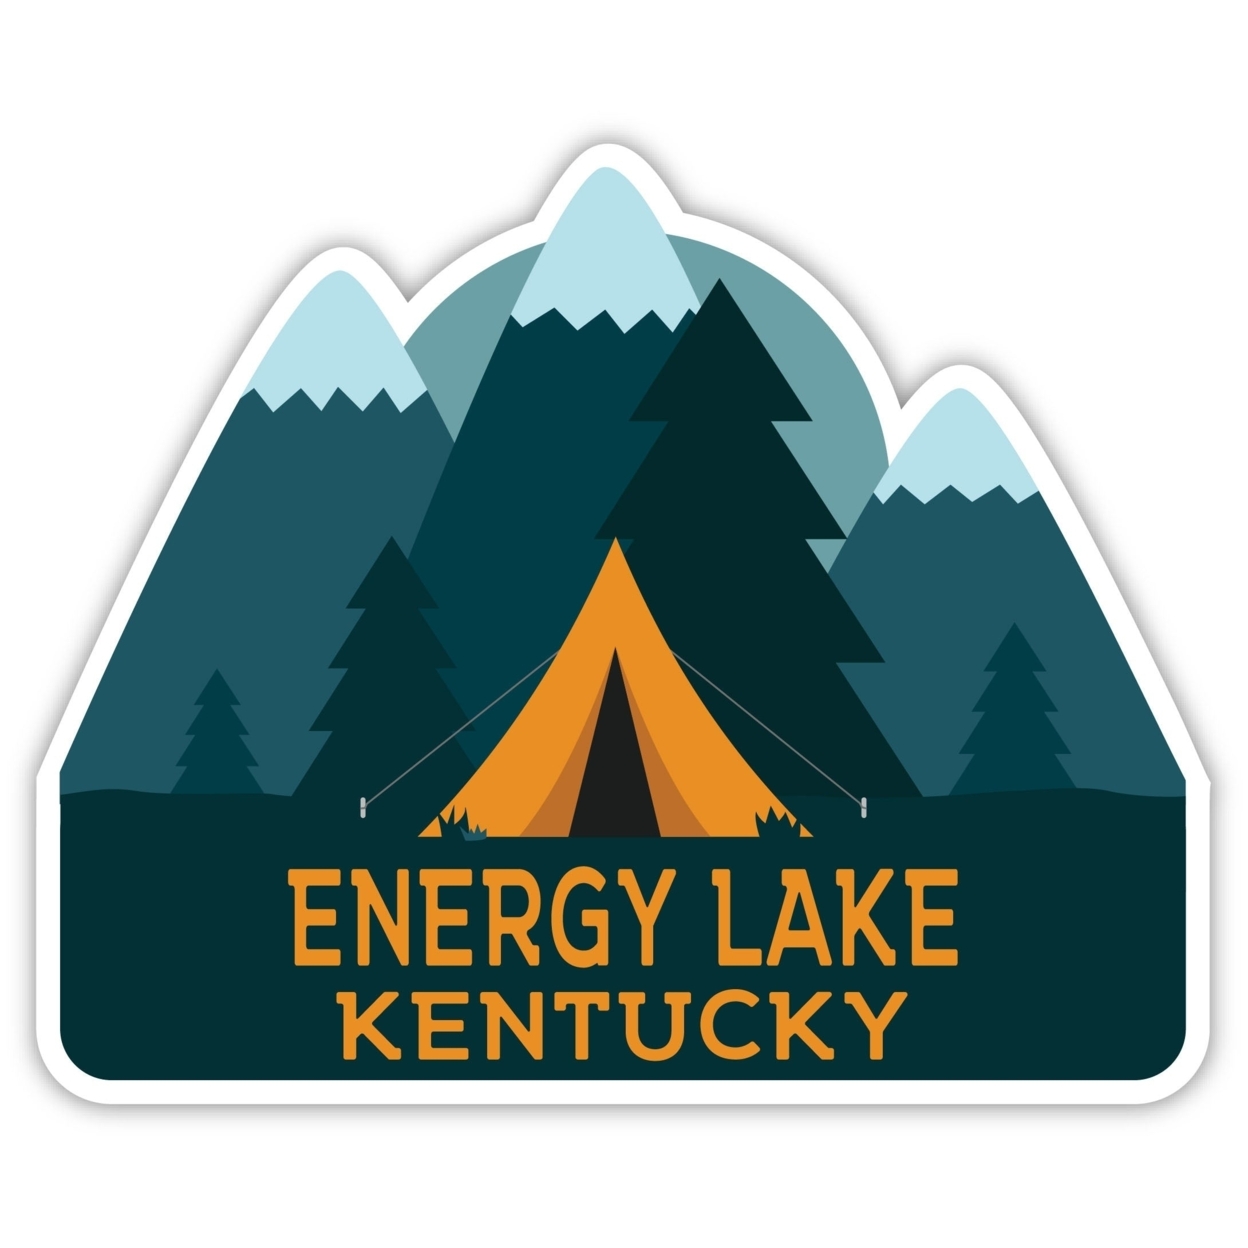 Energy Lake Kentucky Souvenir Decorative Stickers (Choose Theme And Size) - 4-Pack, 10-Inch, Tent